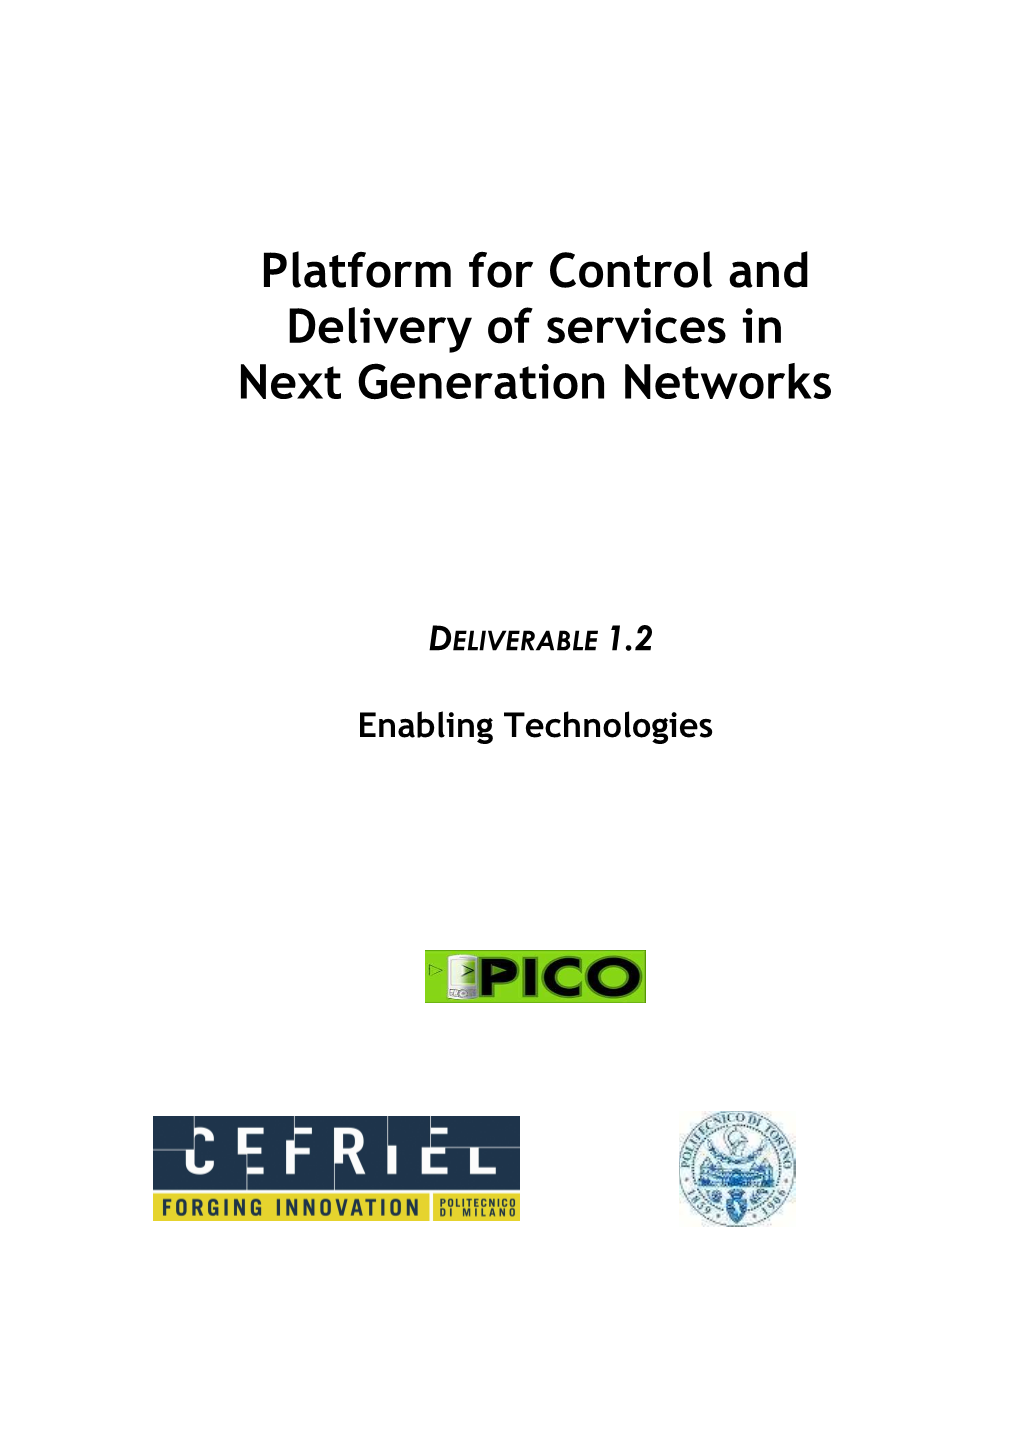 Platform for Control and Delivery of Services in Next Generation Networks